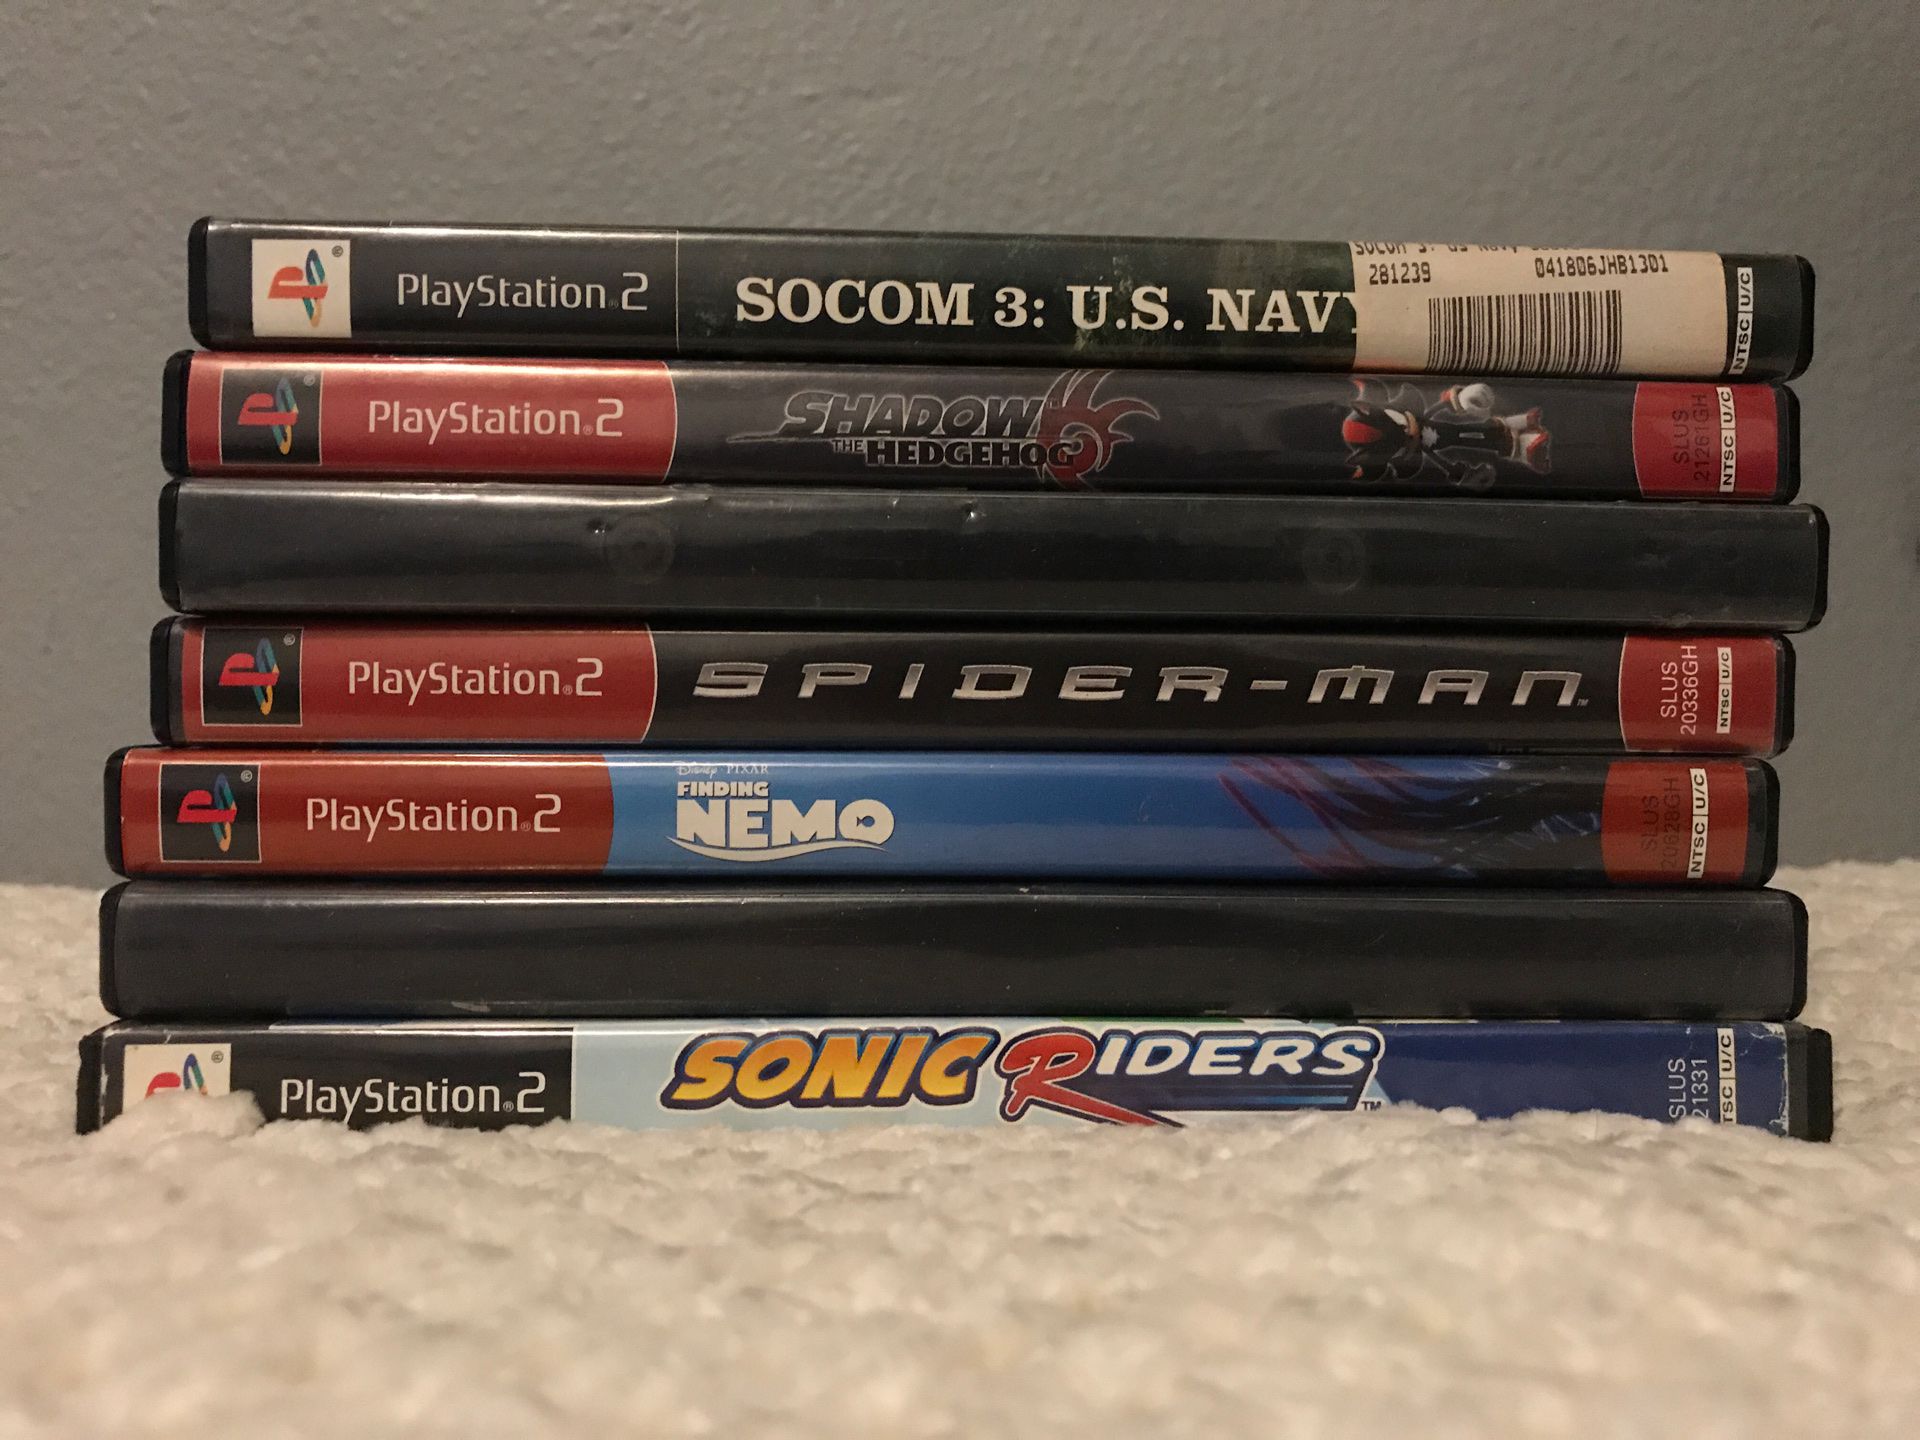 Play station 2 games